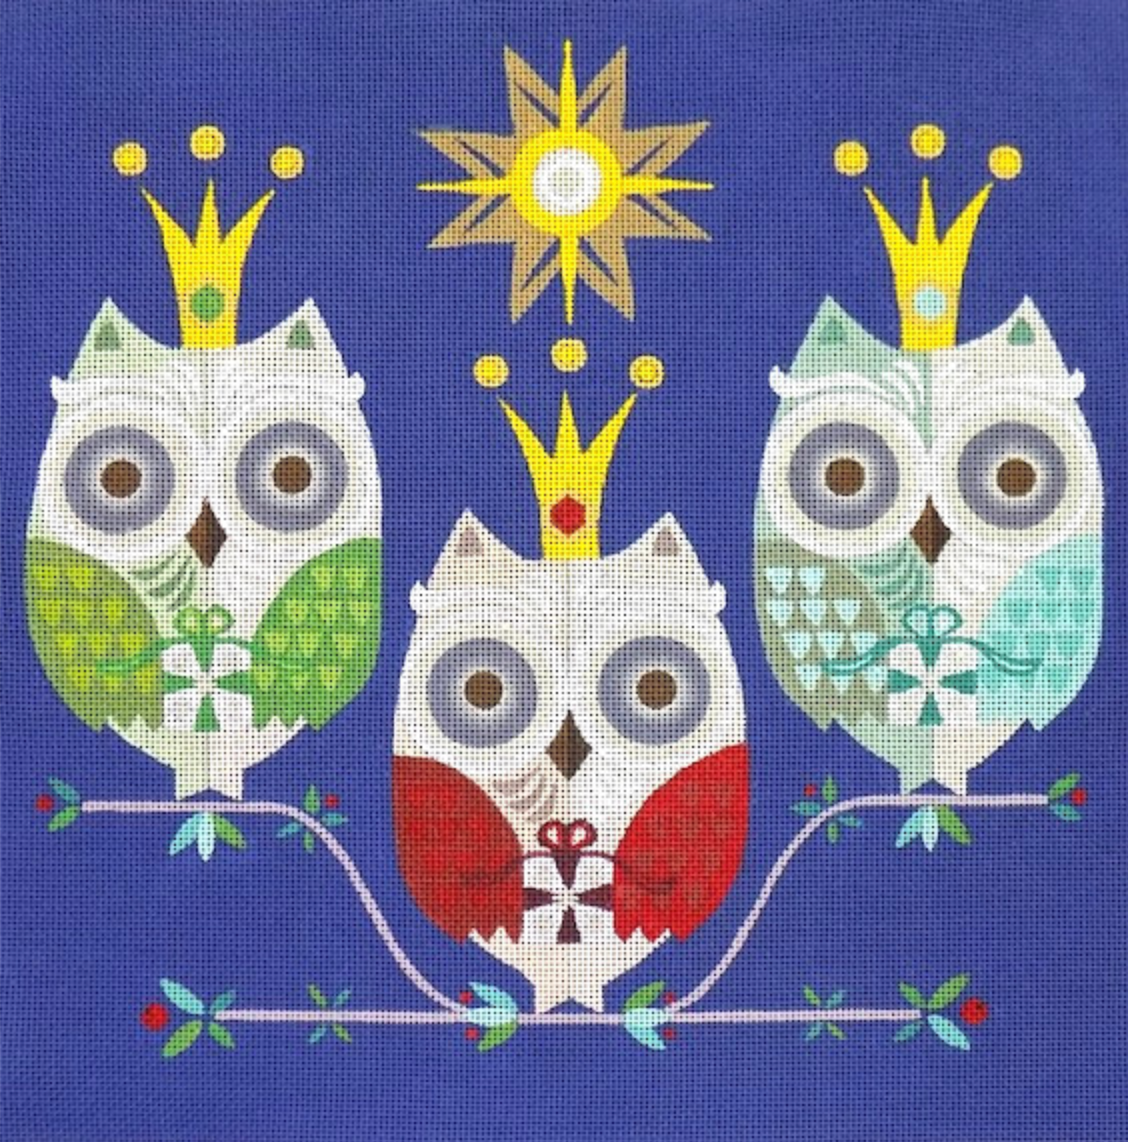 Love You More AS-01 Three Wise Owls 13 mesh